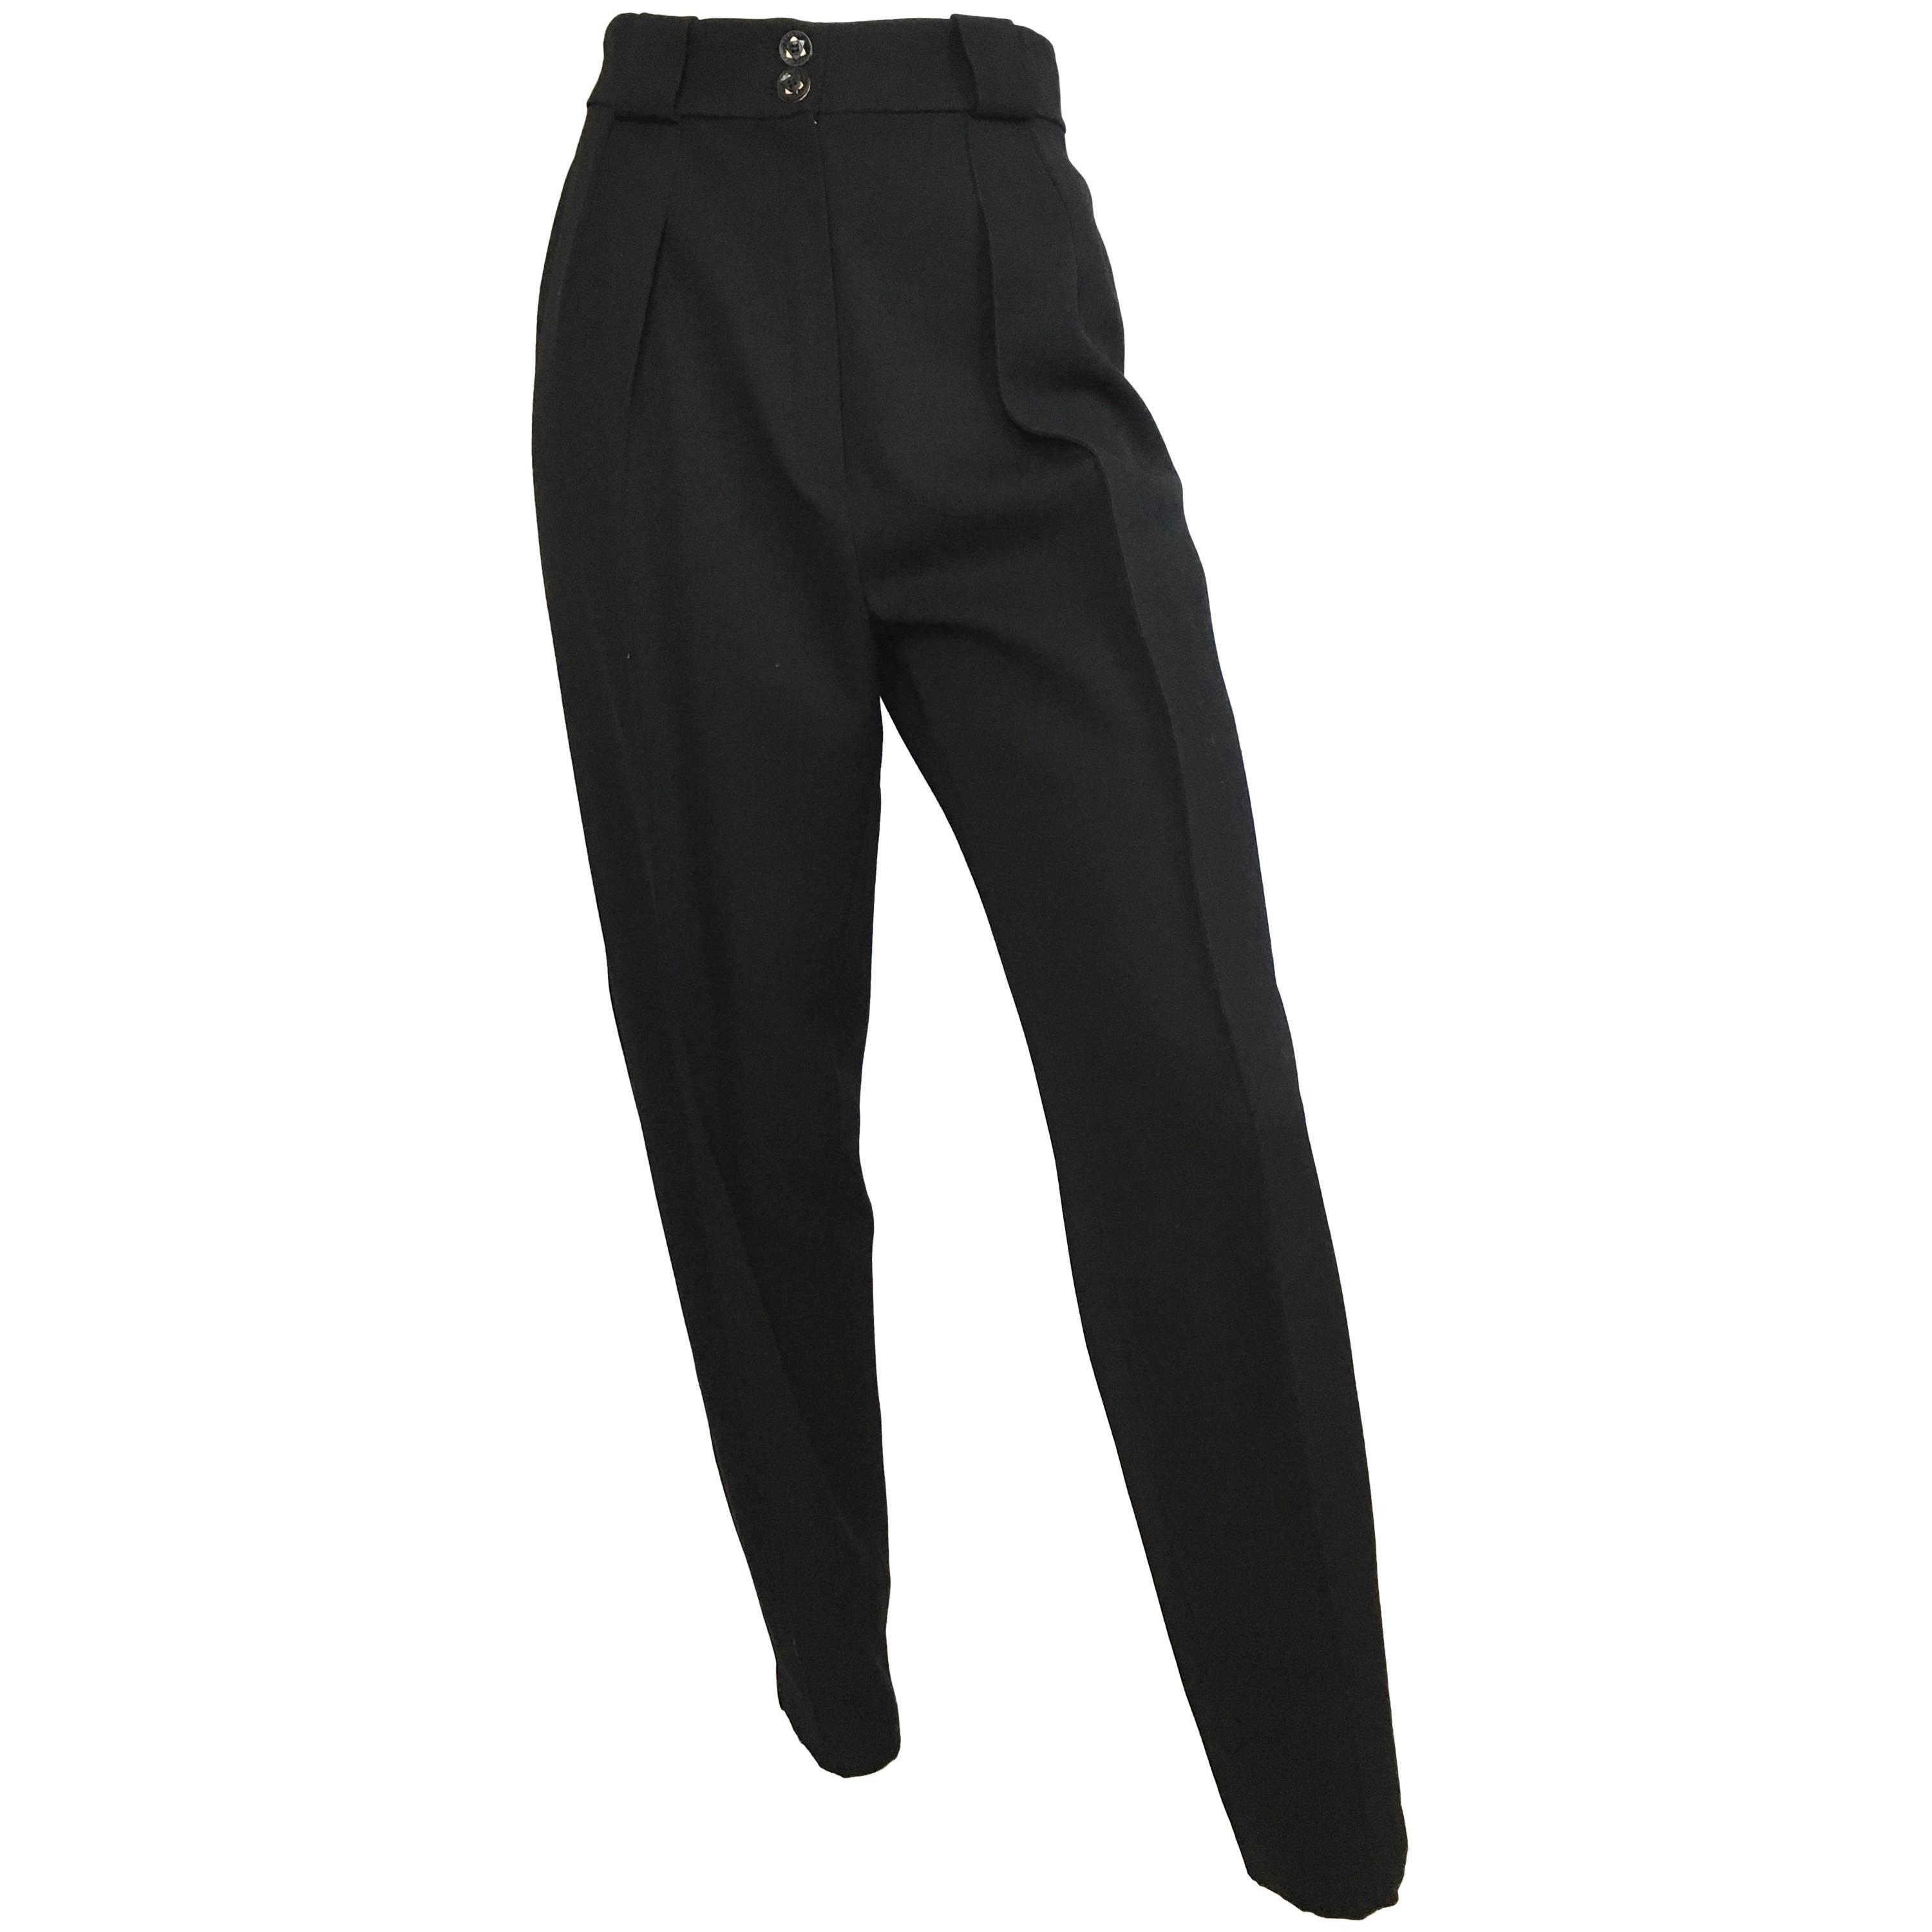 Karl Lagerfeld 1980s Black Wool Pleated Pants Size 4/6. For Sale